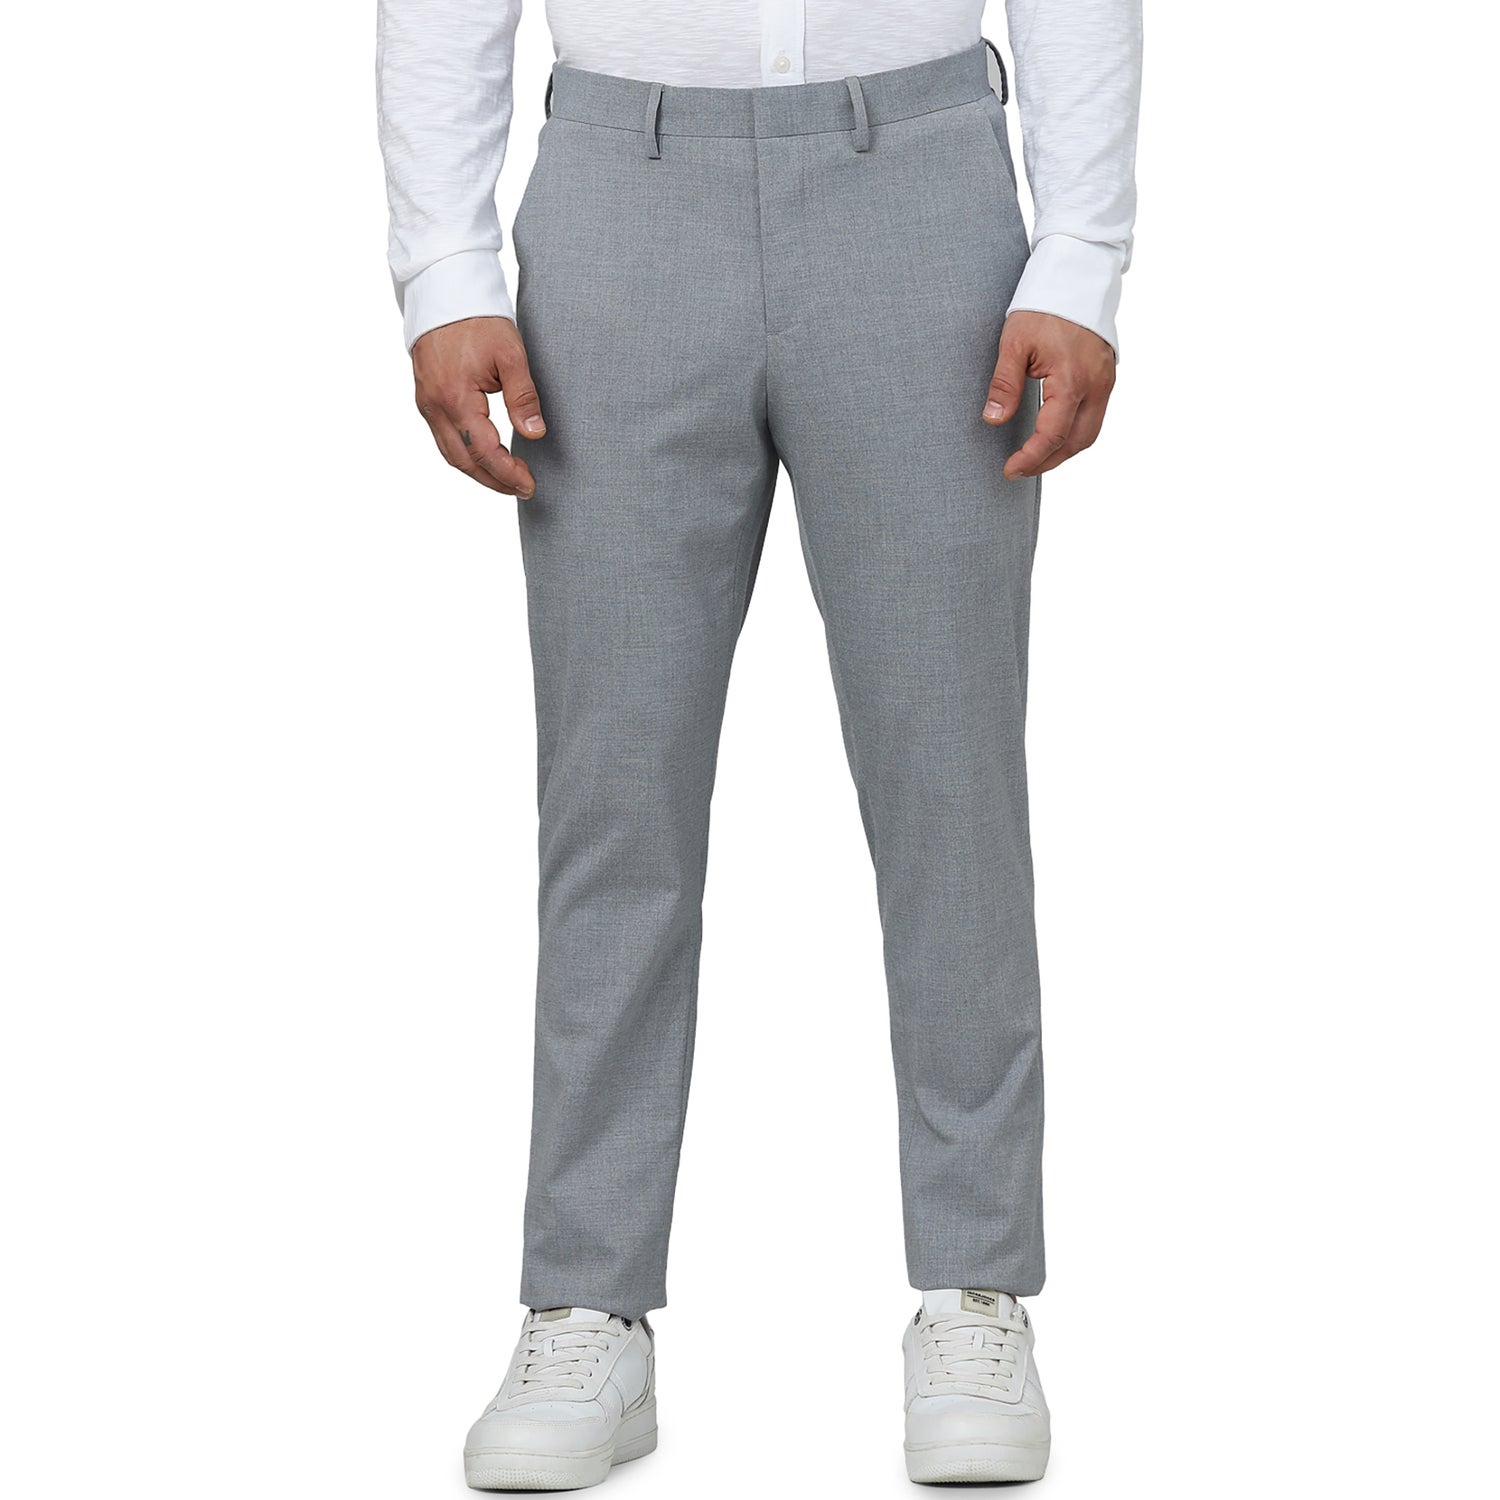 Men's Grey Solid Slim Fit Polyester Formal Trousers (BOAMAURY)